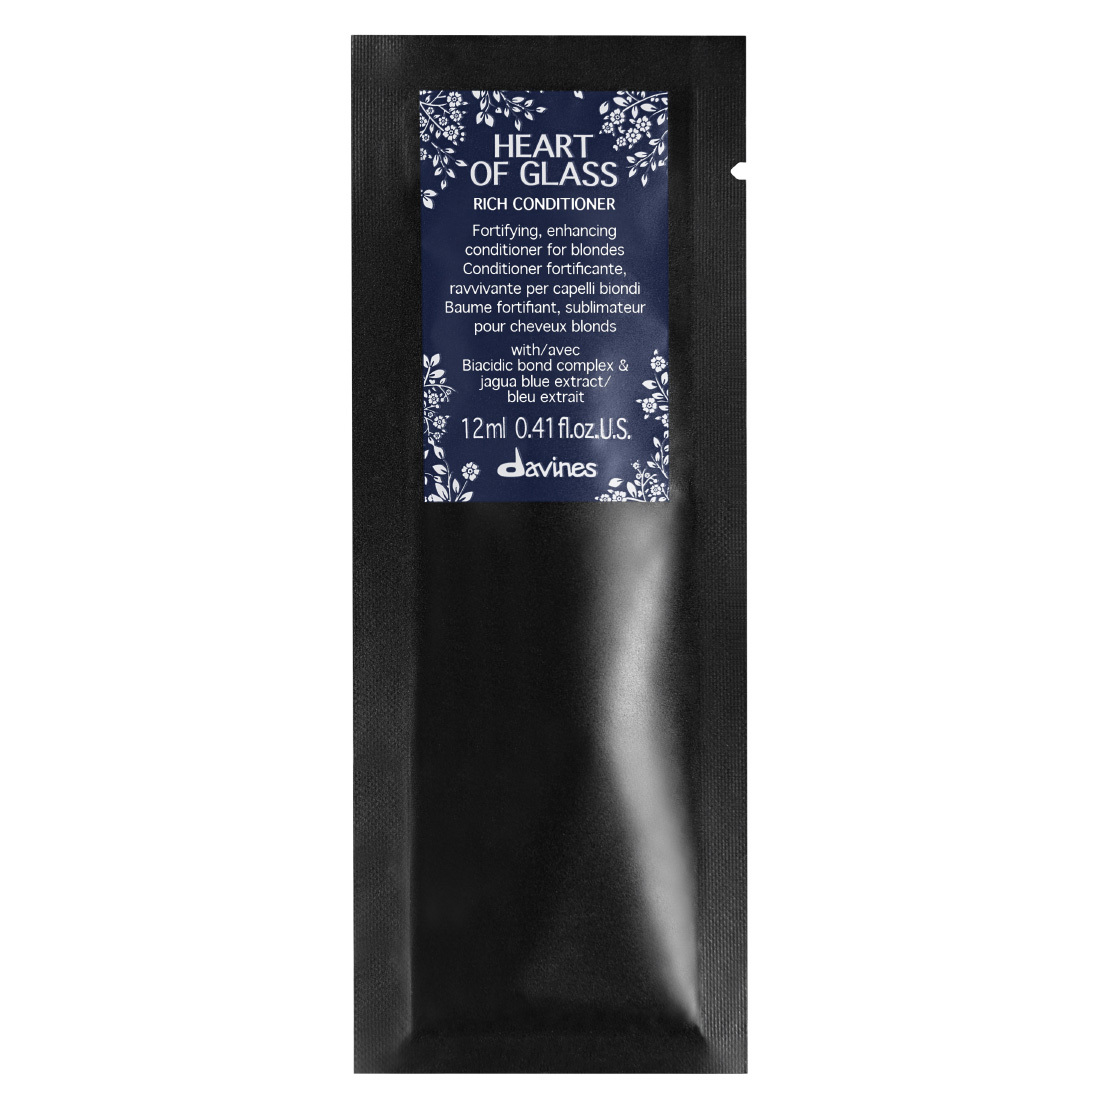 Davines Heart of Glass Rich Conditioner Sachet - 12 pack